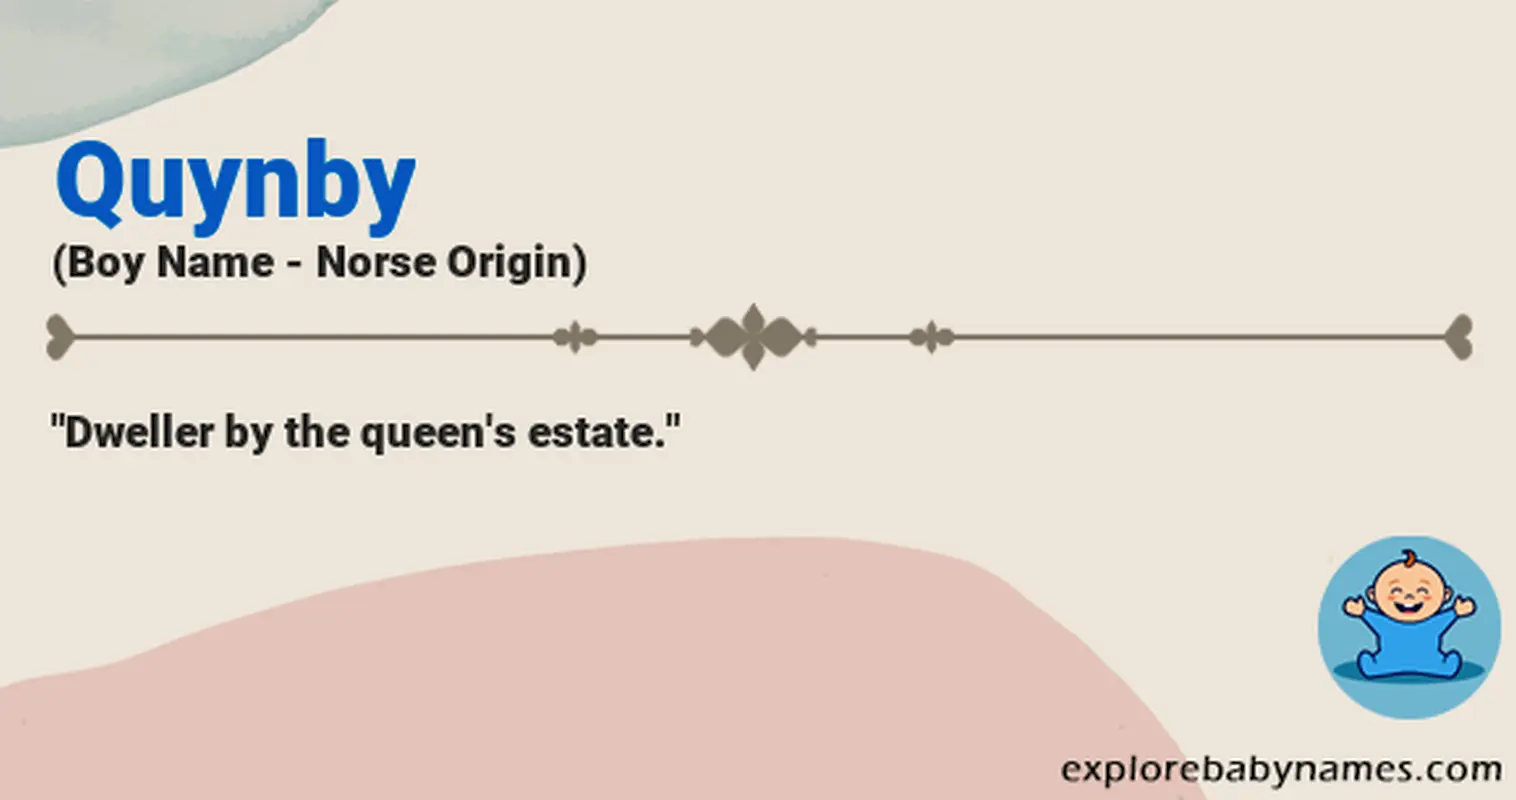 Meaning of Quynby